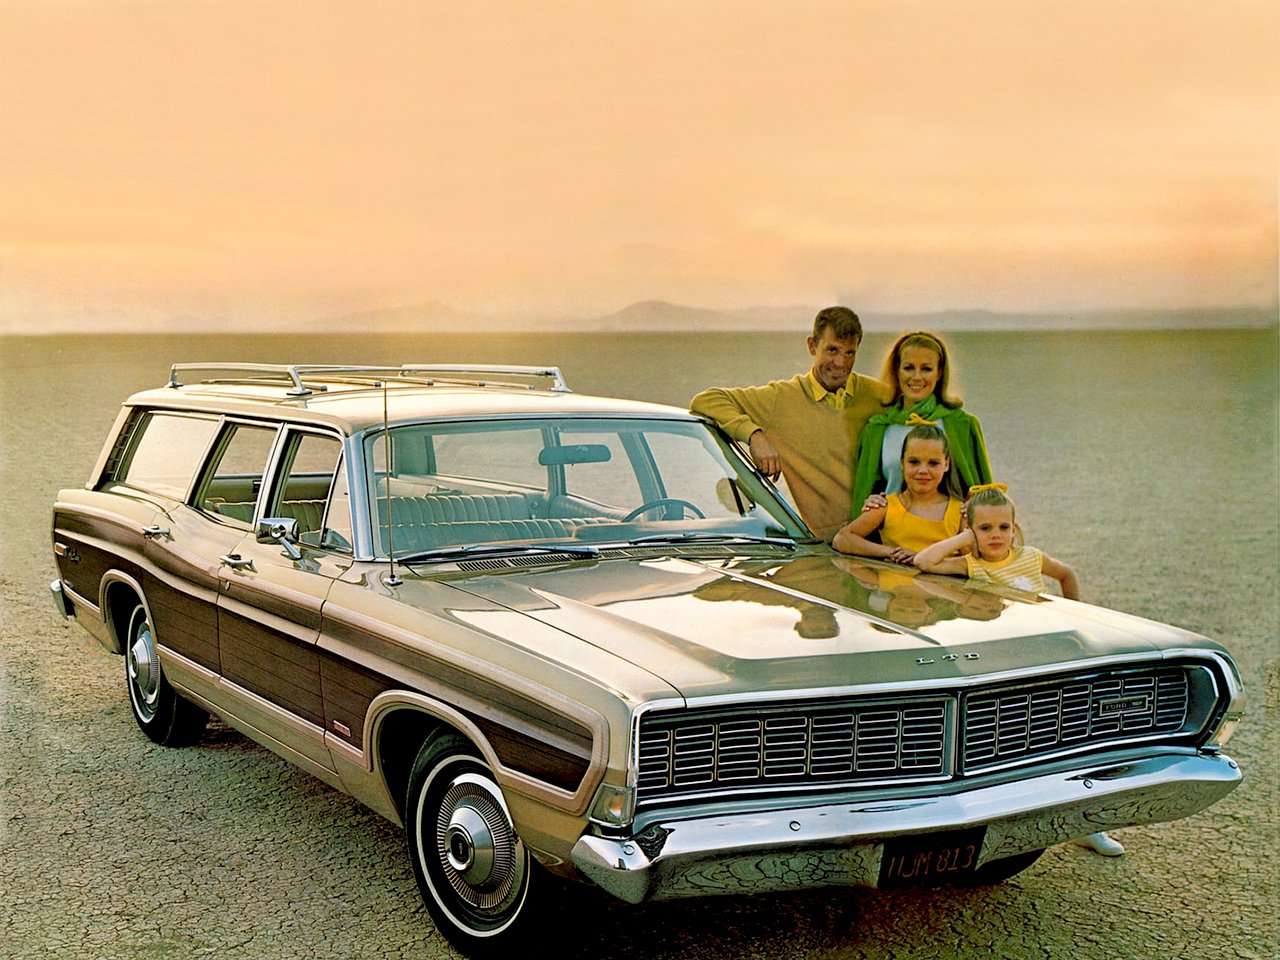 1968 Ford LTD Country Squire kombi online puzzle